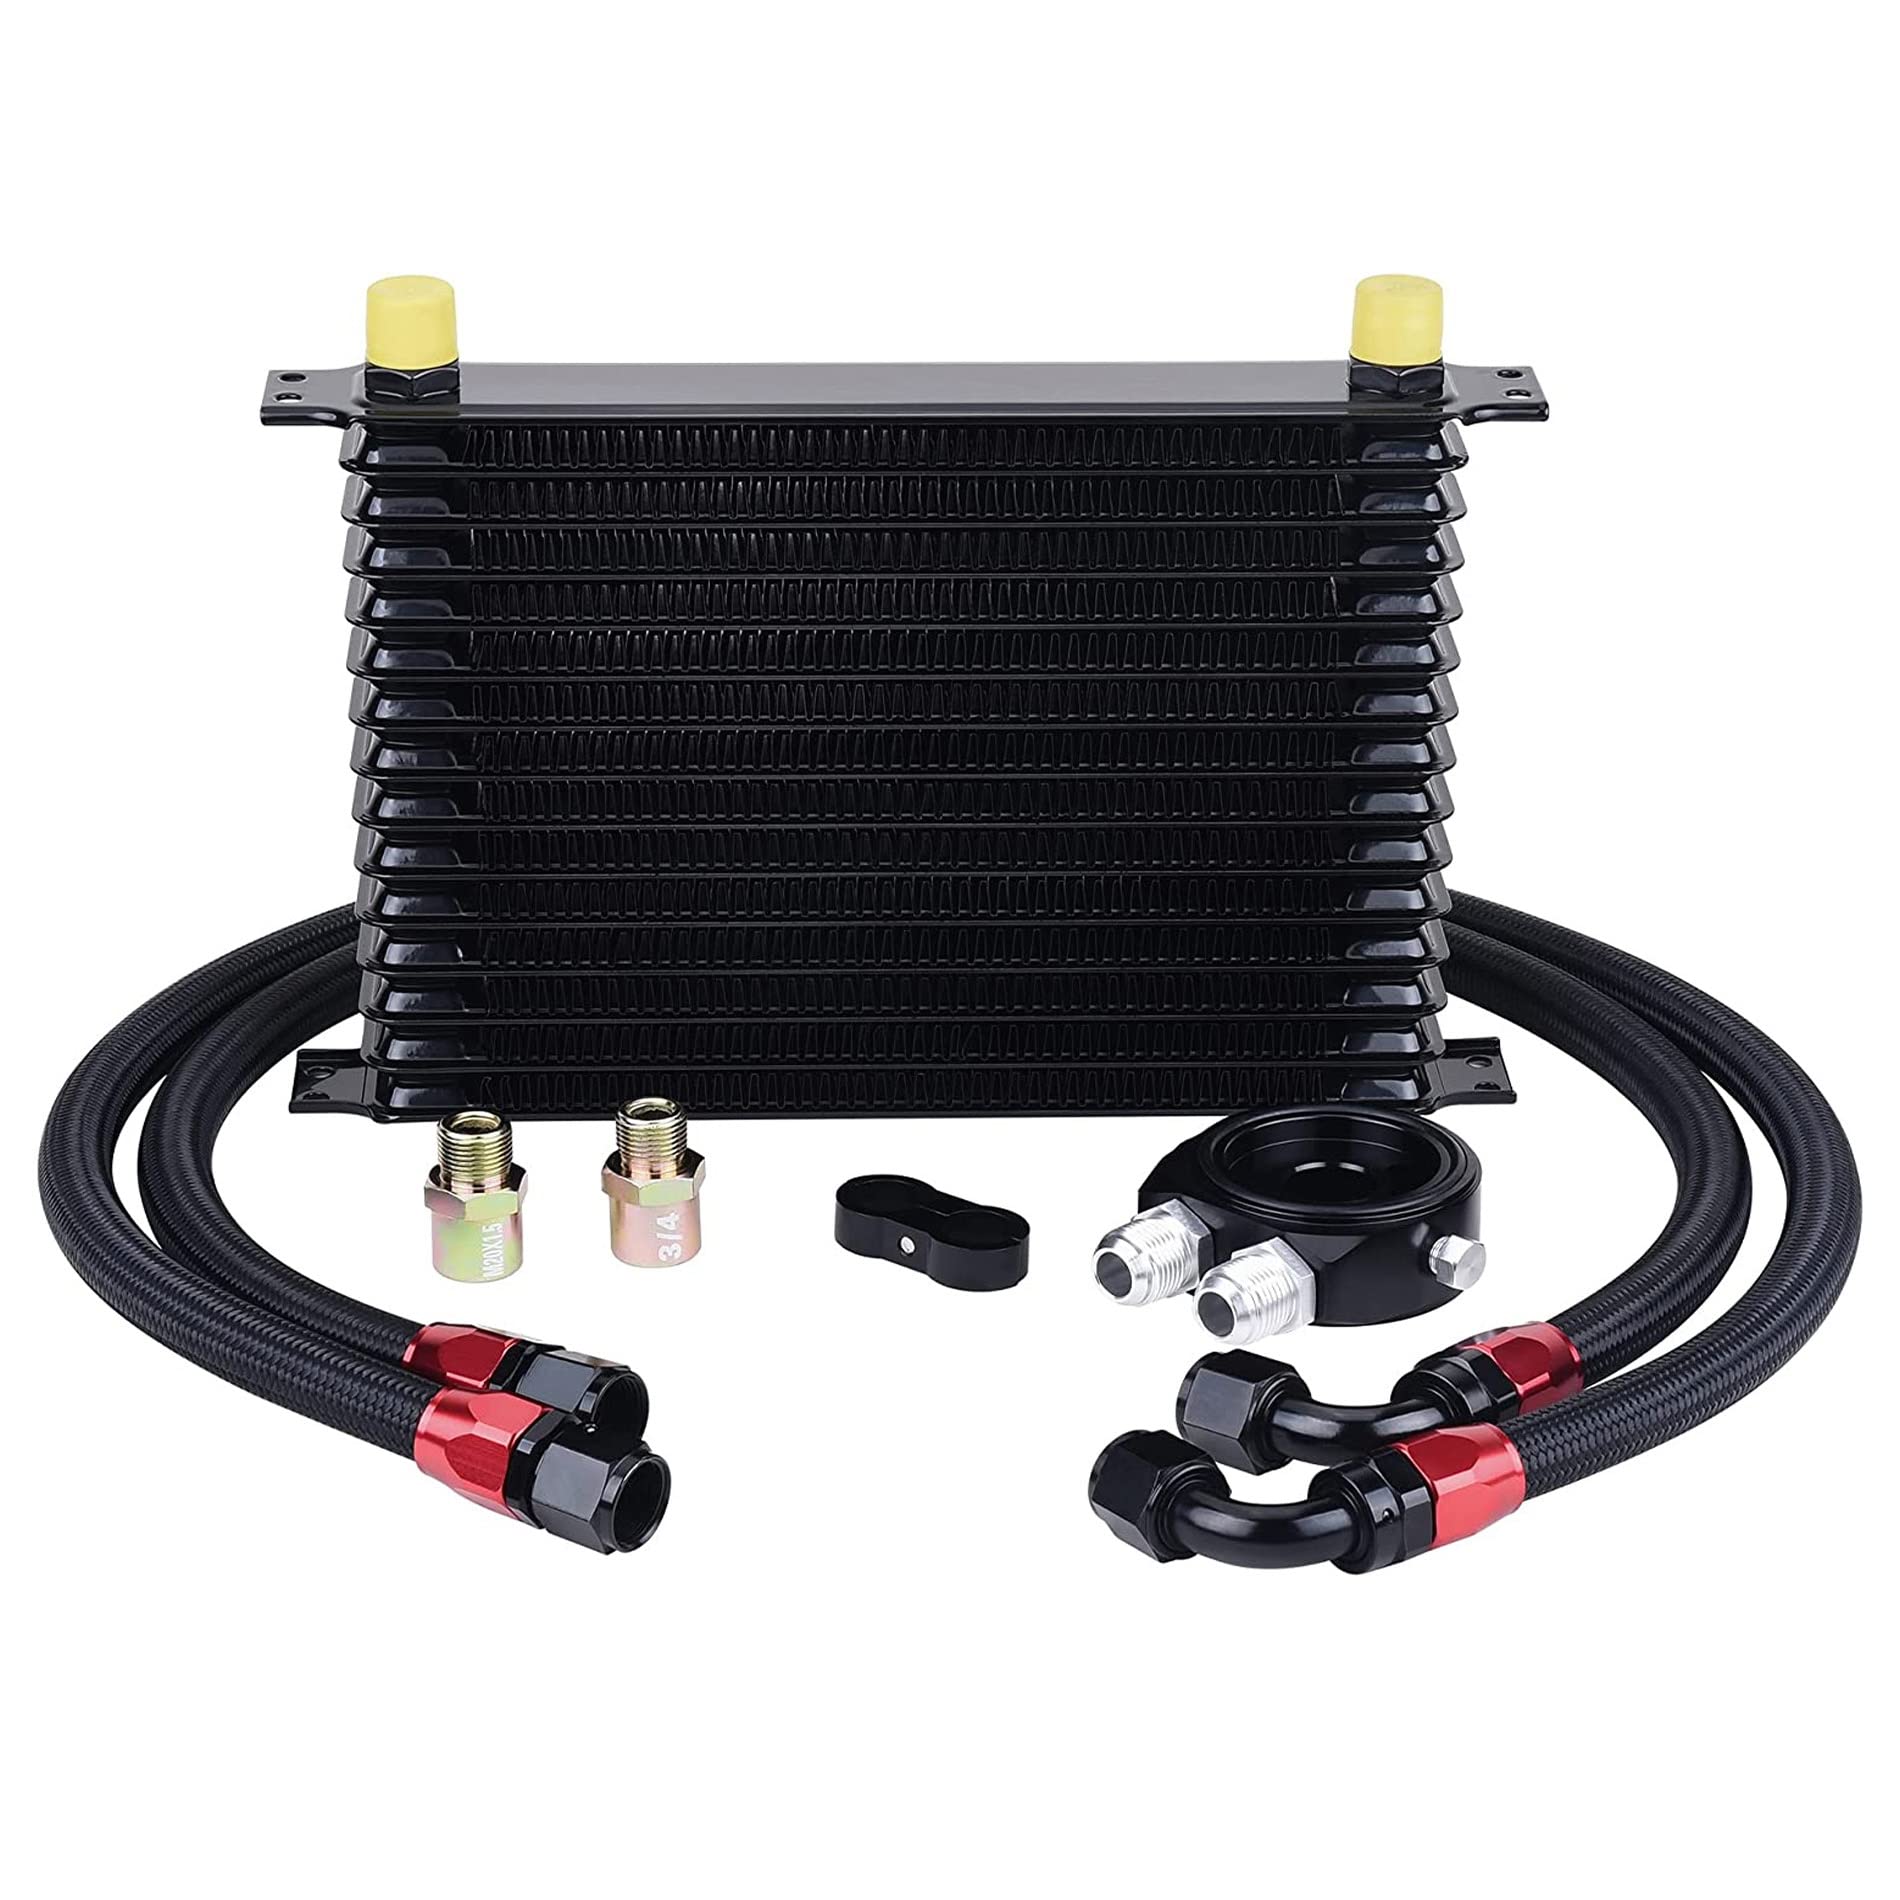 Engine Oil Coolers: Installation, Replacement & Benefits